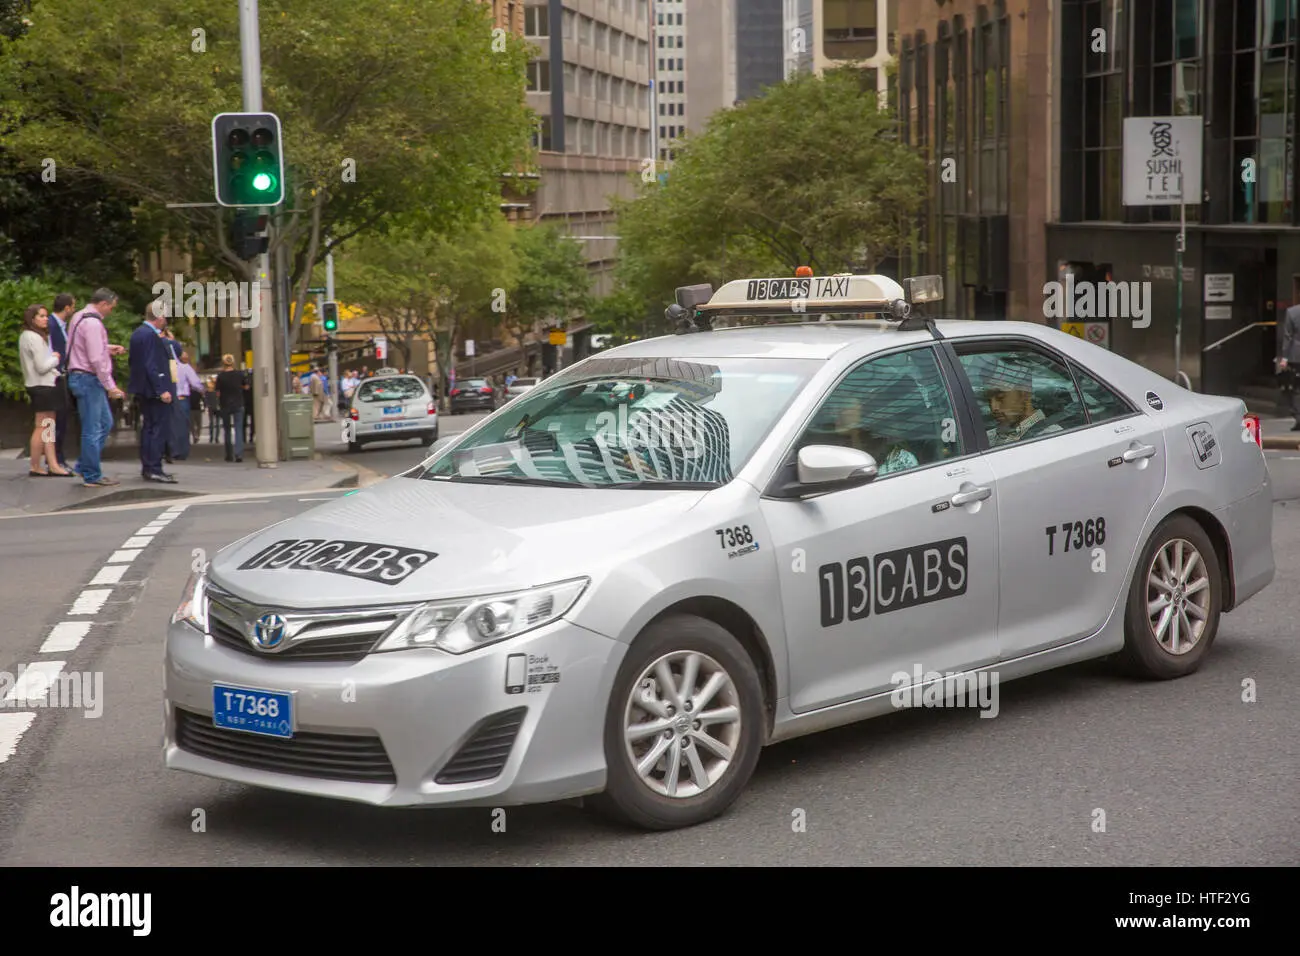 how much is a taxi in sydney - Do Sydney taxis take cash